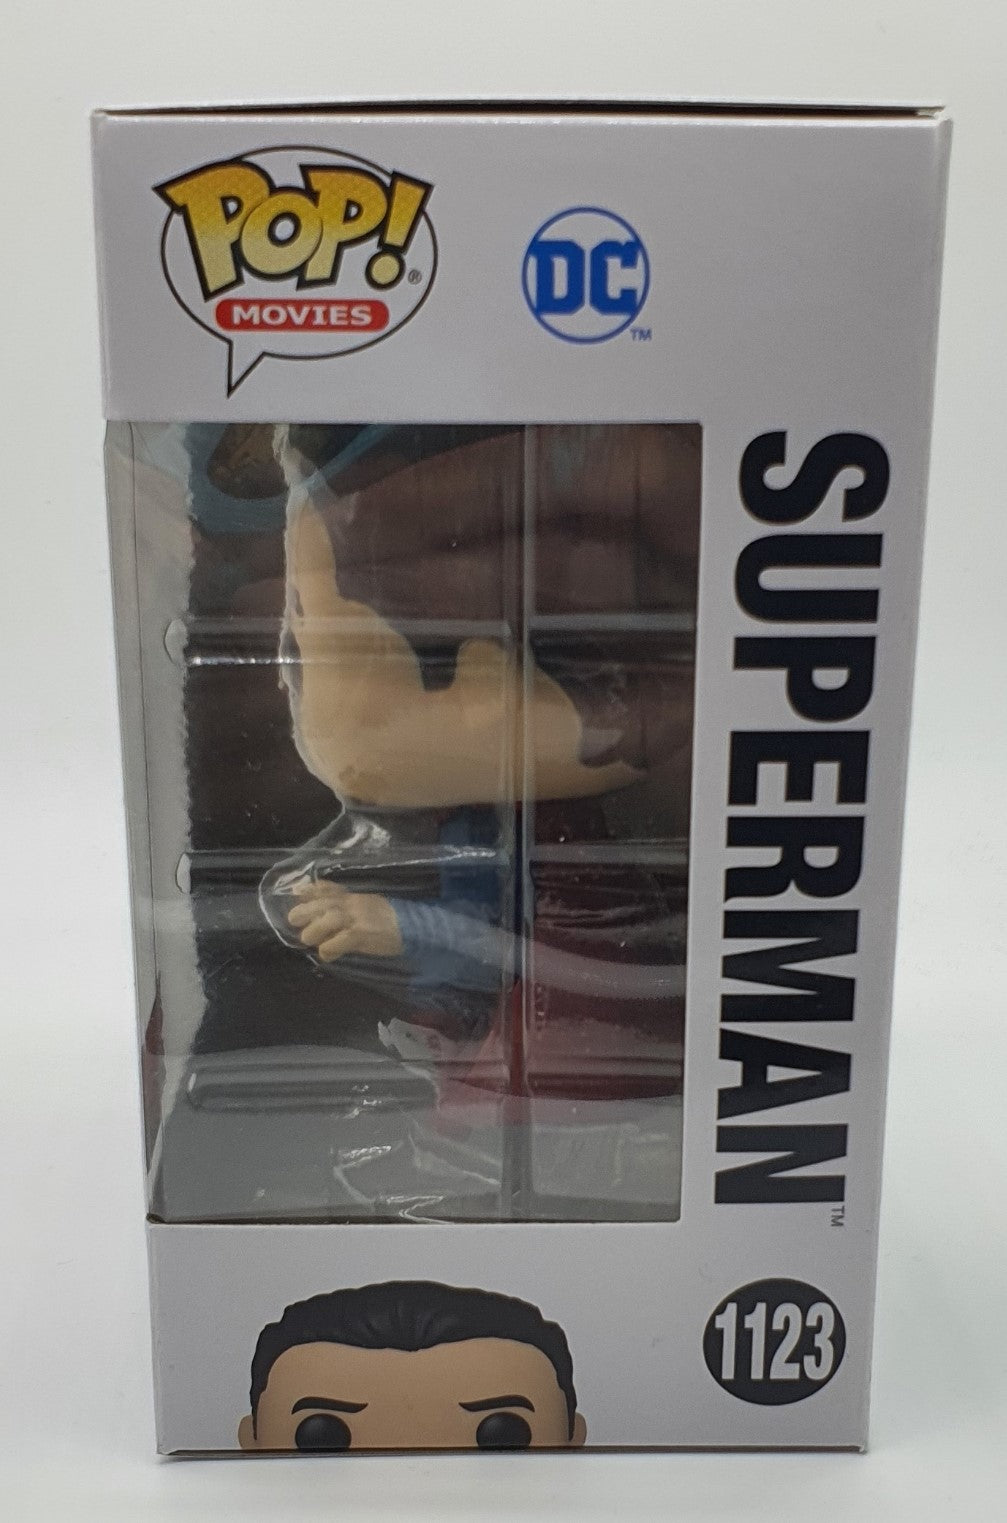 1123 - DC JUSTICE LEAGUE - SUPERMAN (AAA ANIME EXCLUSIVE)